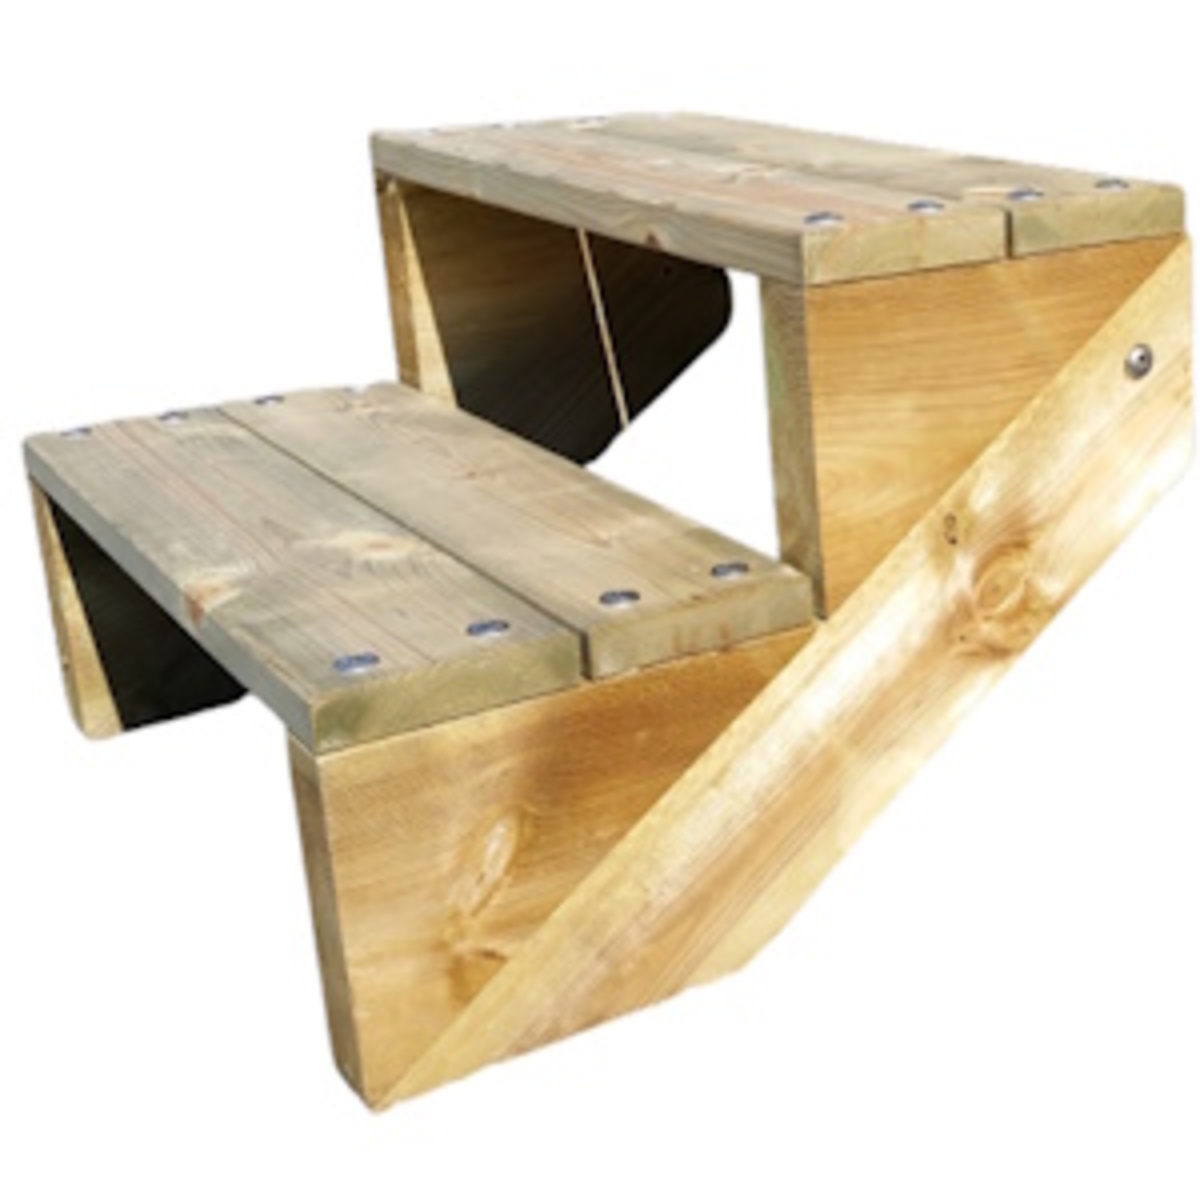 Tuintrap hout type A - 2 tot 7 treden